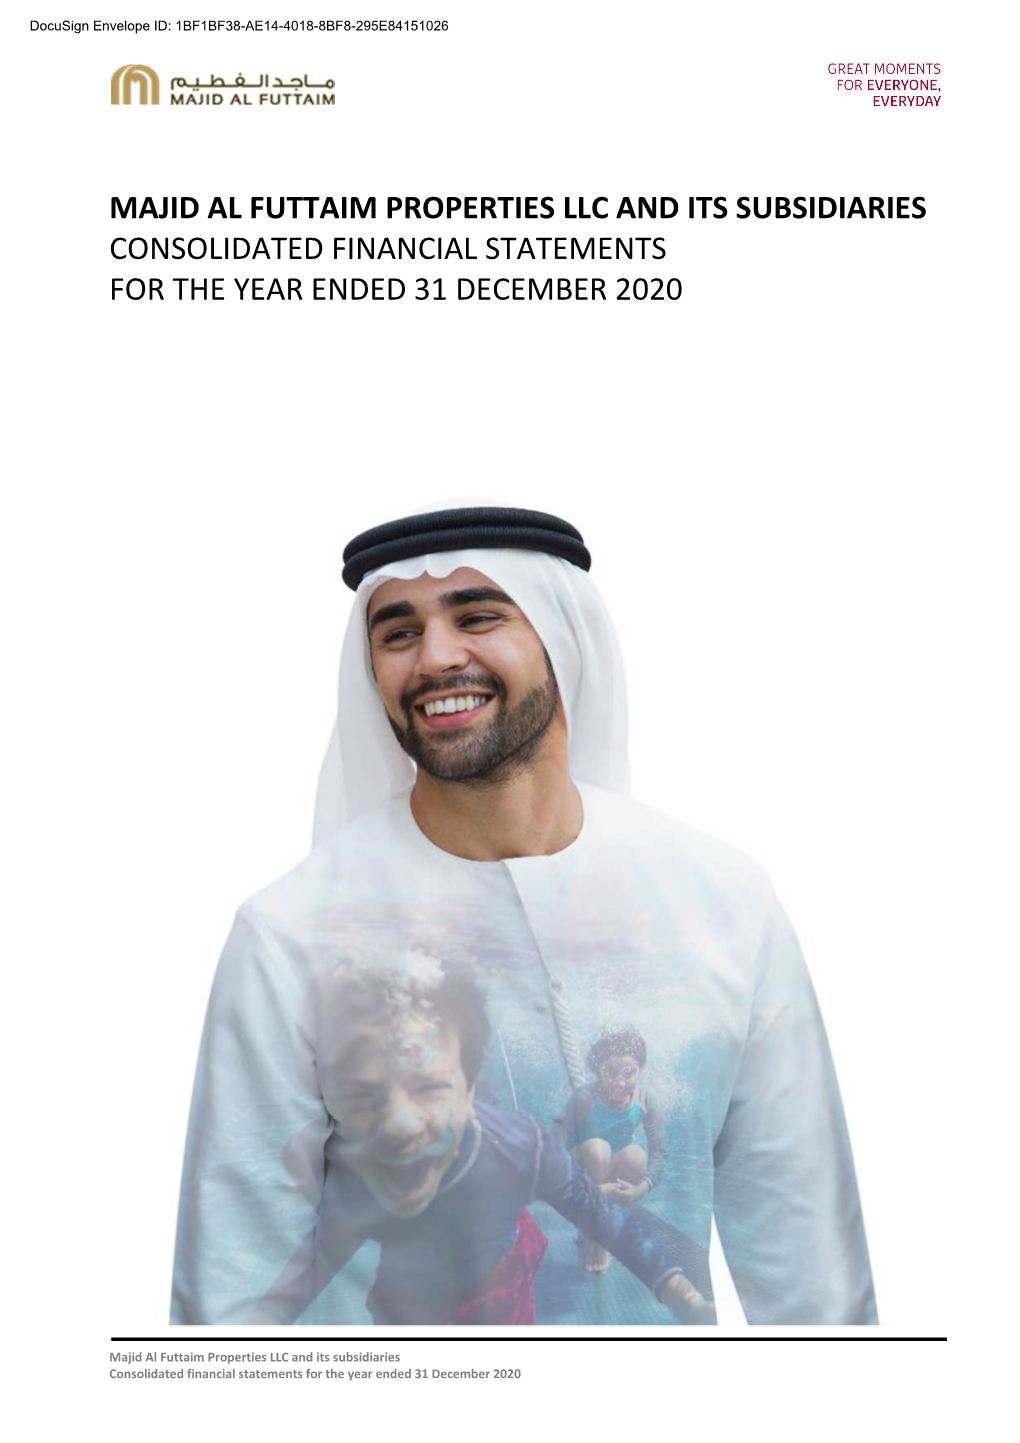 Majid Al Futtaim Properties Llc and Its Subsidiaries Consolidated Financial Statements for the Year Ended 31 December 2020